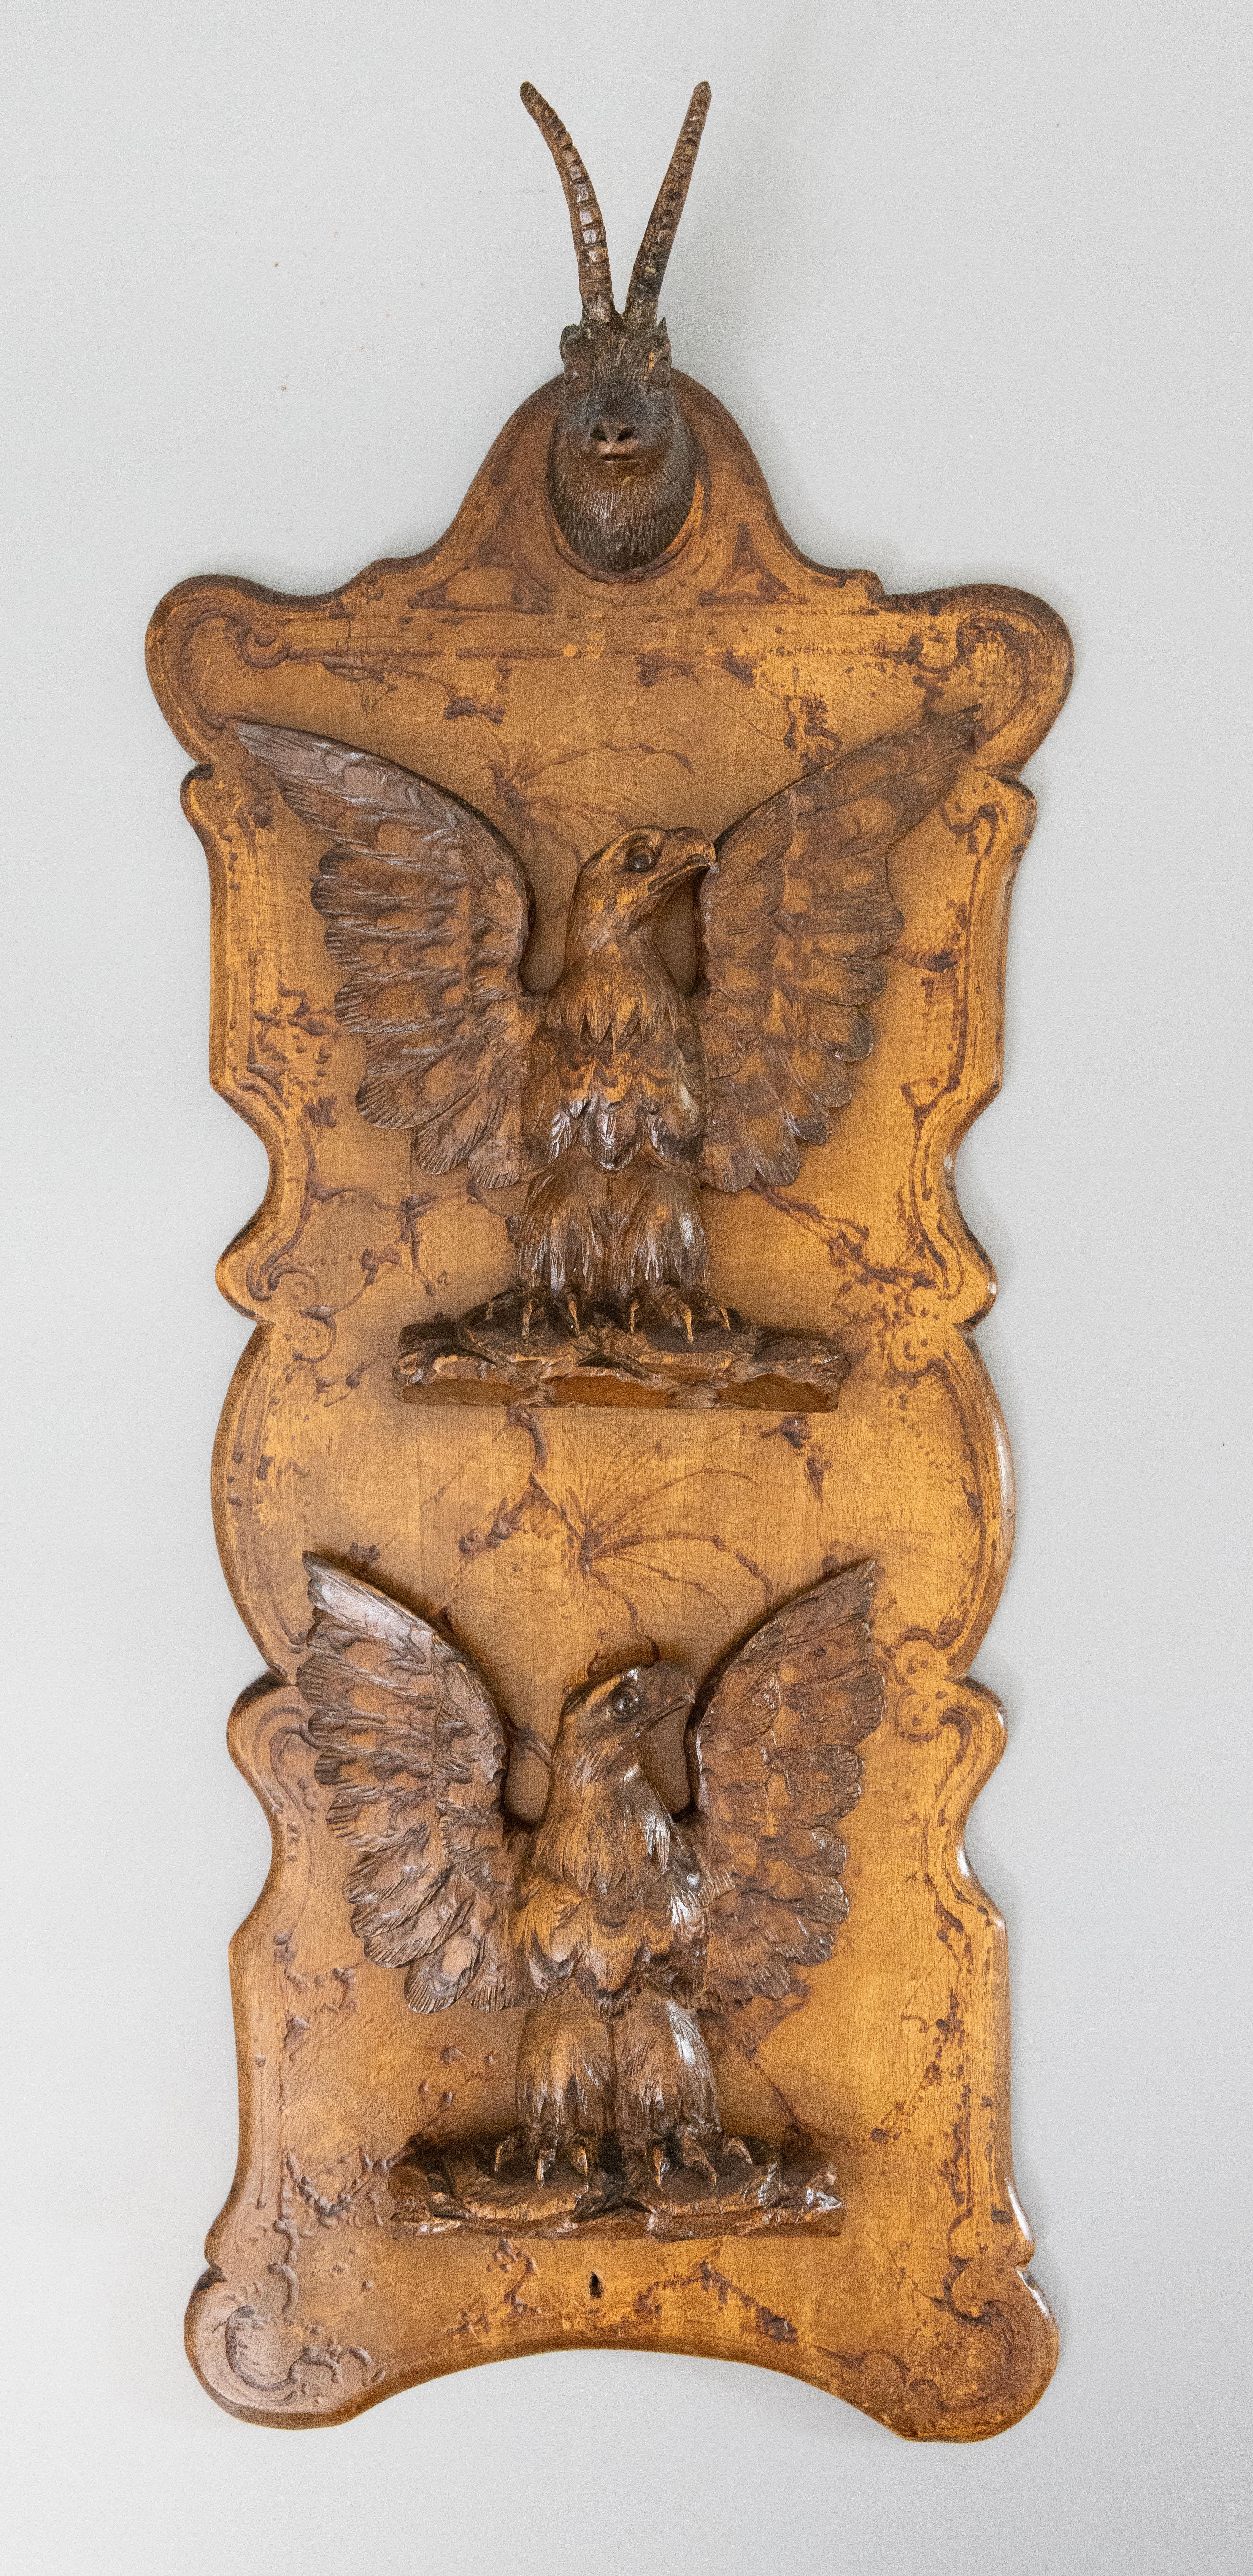 A rare antique Swiss Black Forest carved antelope and eagles wall mounted letter rack, circa 1900. This fine letter holder is a nice large size and has two eagles that fold out to hold letters, magazines, or personal documents. The eagles and